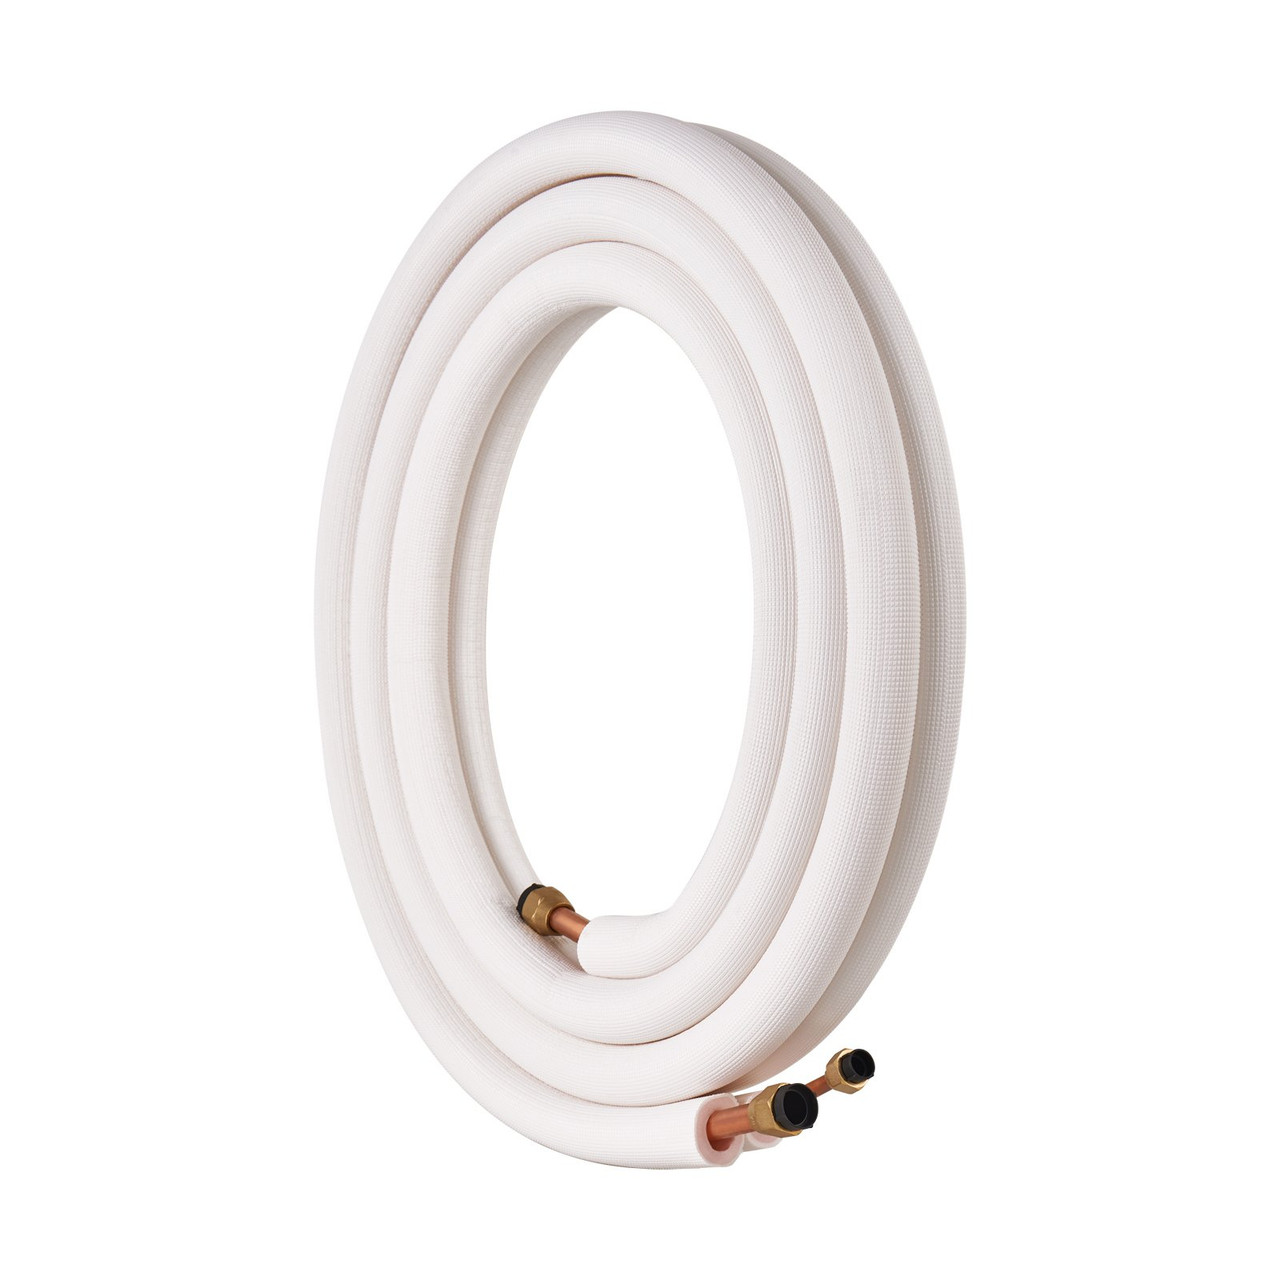 VEVOR 16FT Mini Split Line Set, 3/8" & 5/8" O.D Copper Pipes Tubing and Triple-Layer Insulation, for Air Conditioning or Heating Pump Equipment & HVAC with Rich Accessories (18ft Connection Cable)